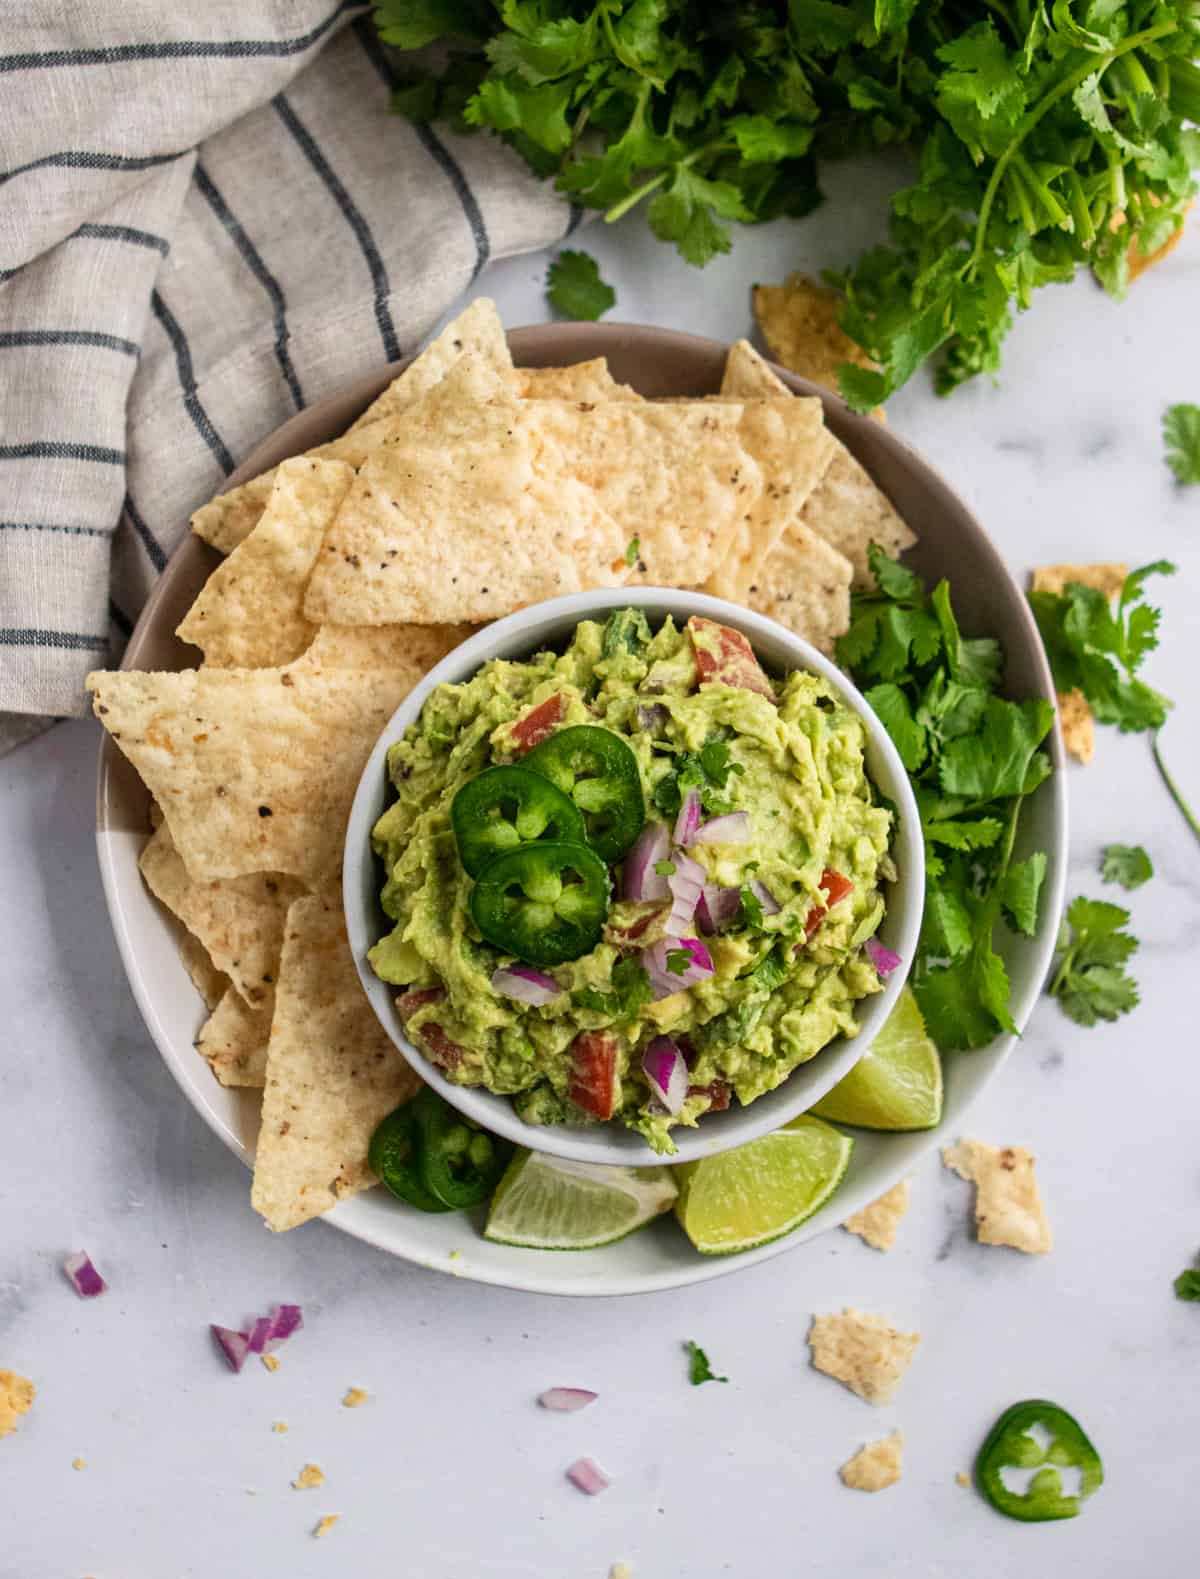 Guacamole with chips and fixins.